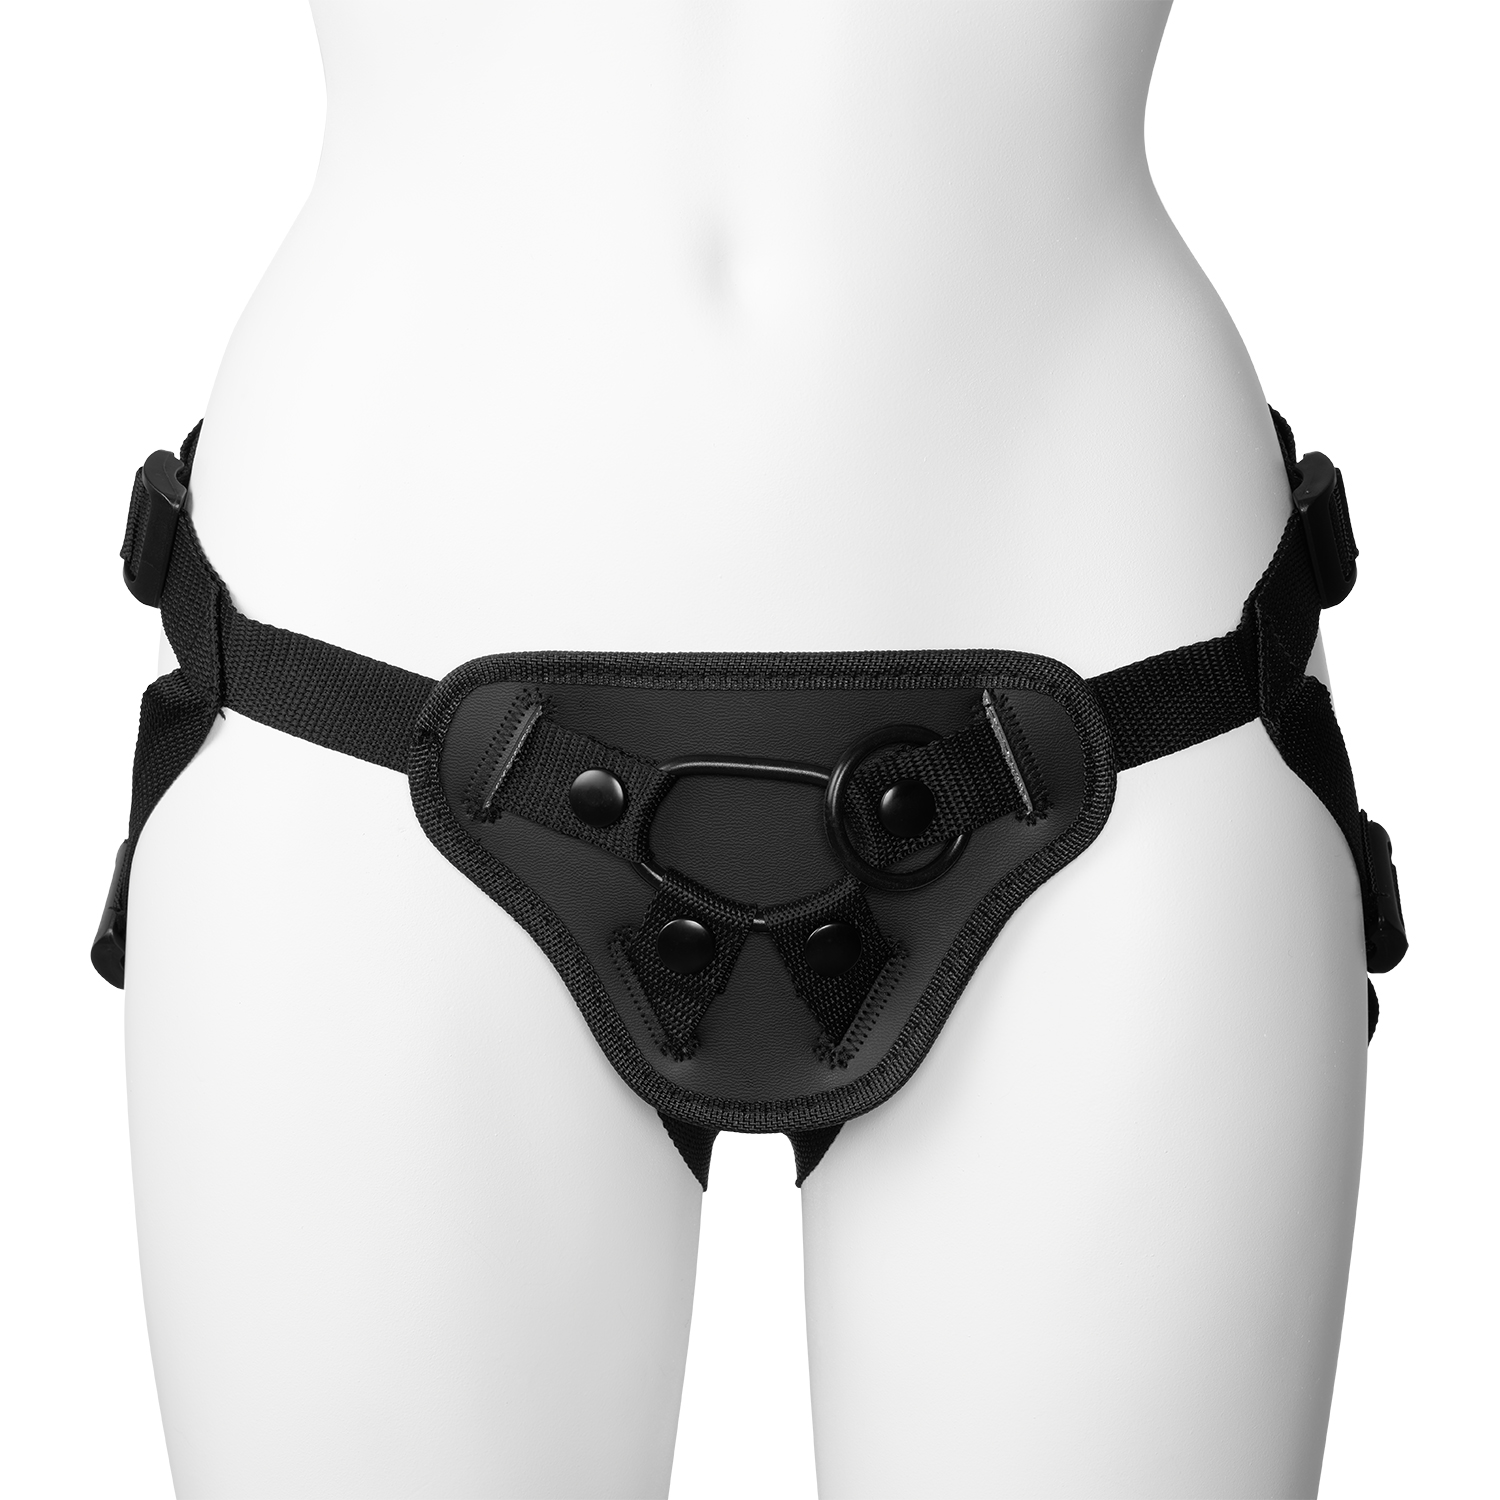 Obaie Unisex Strap-On Harness